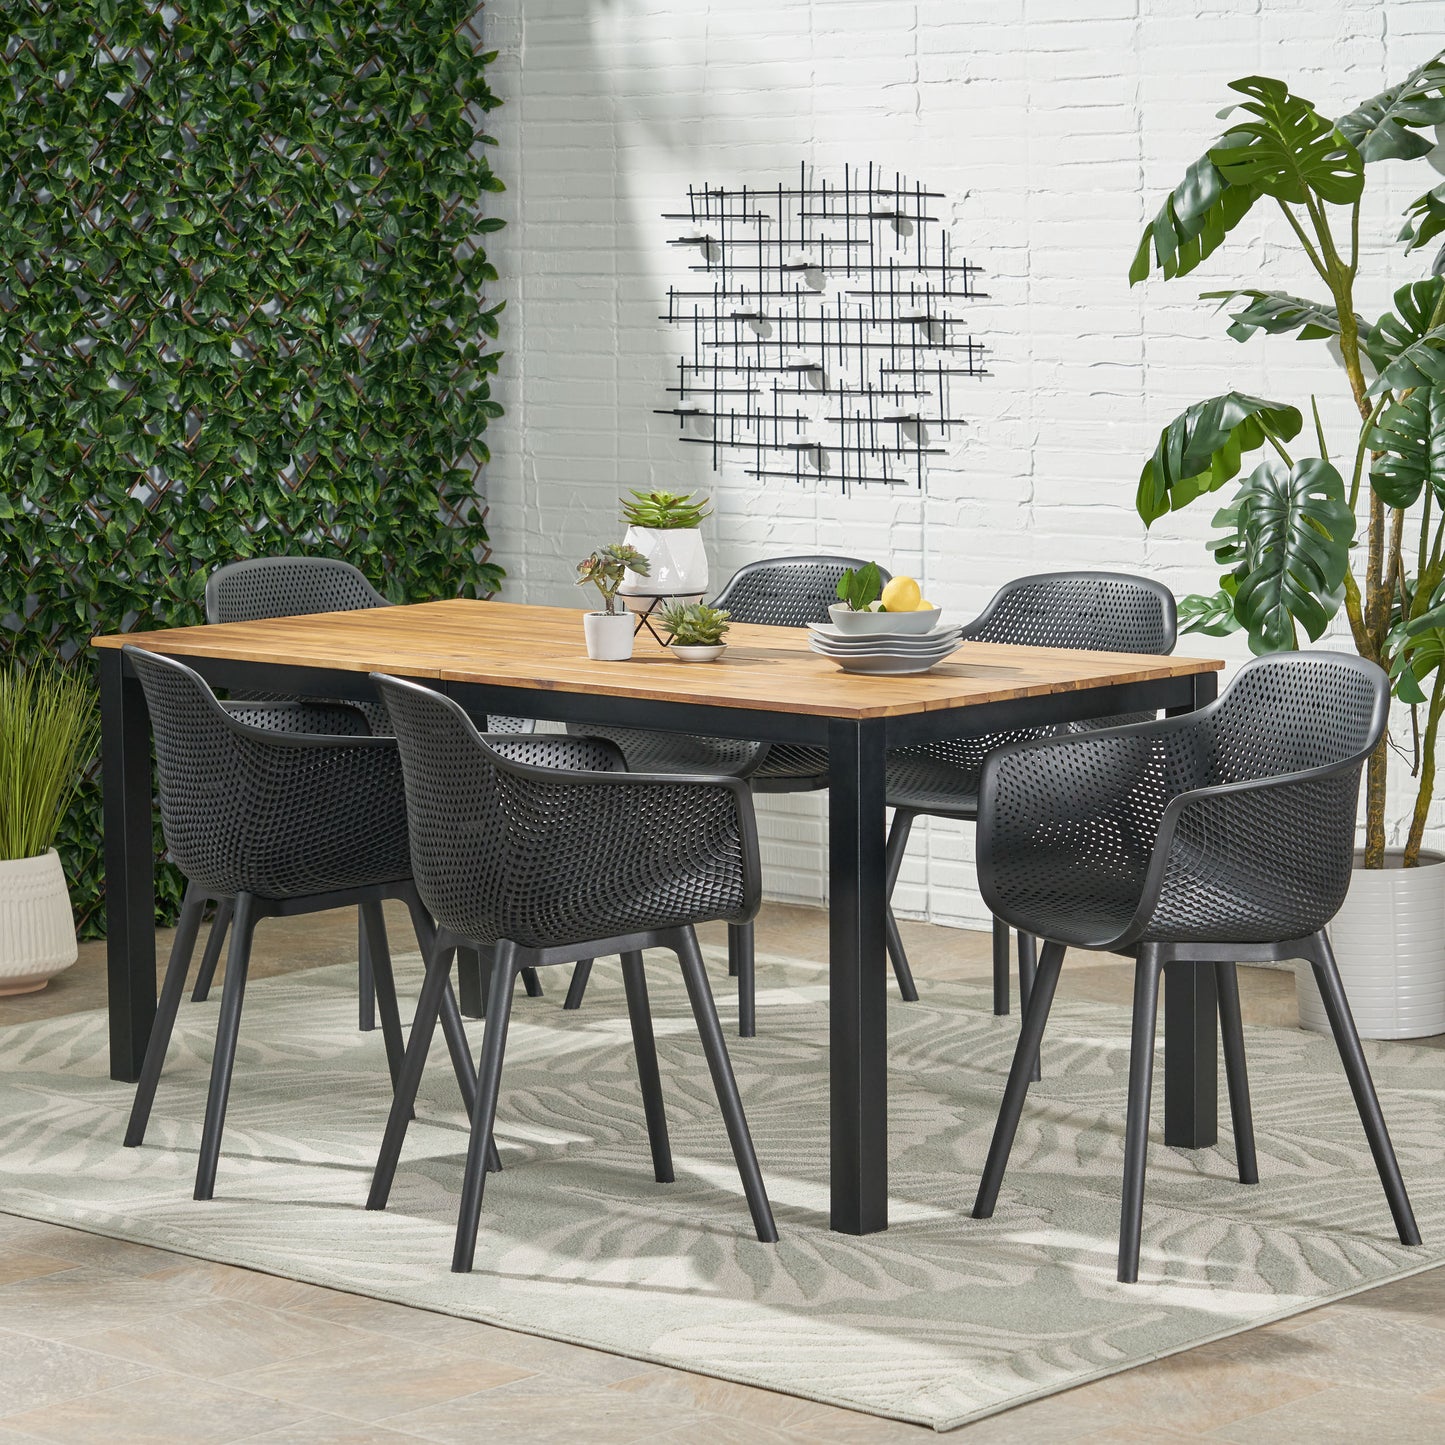 Riviera Outdoor Wood and Resin 7 Piece Dining Set, Black and Teak